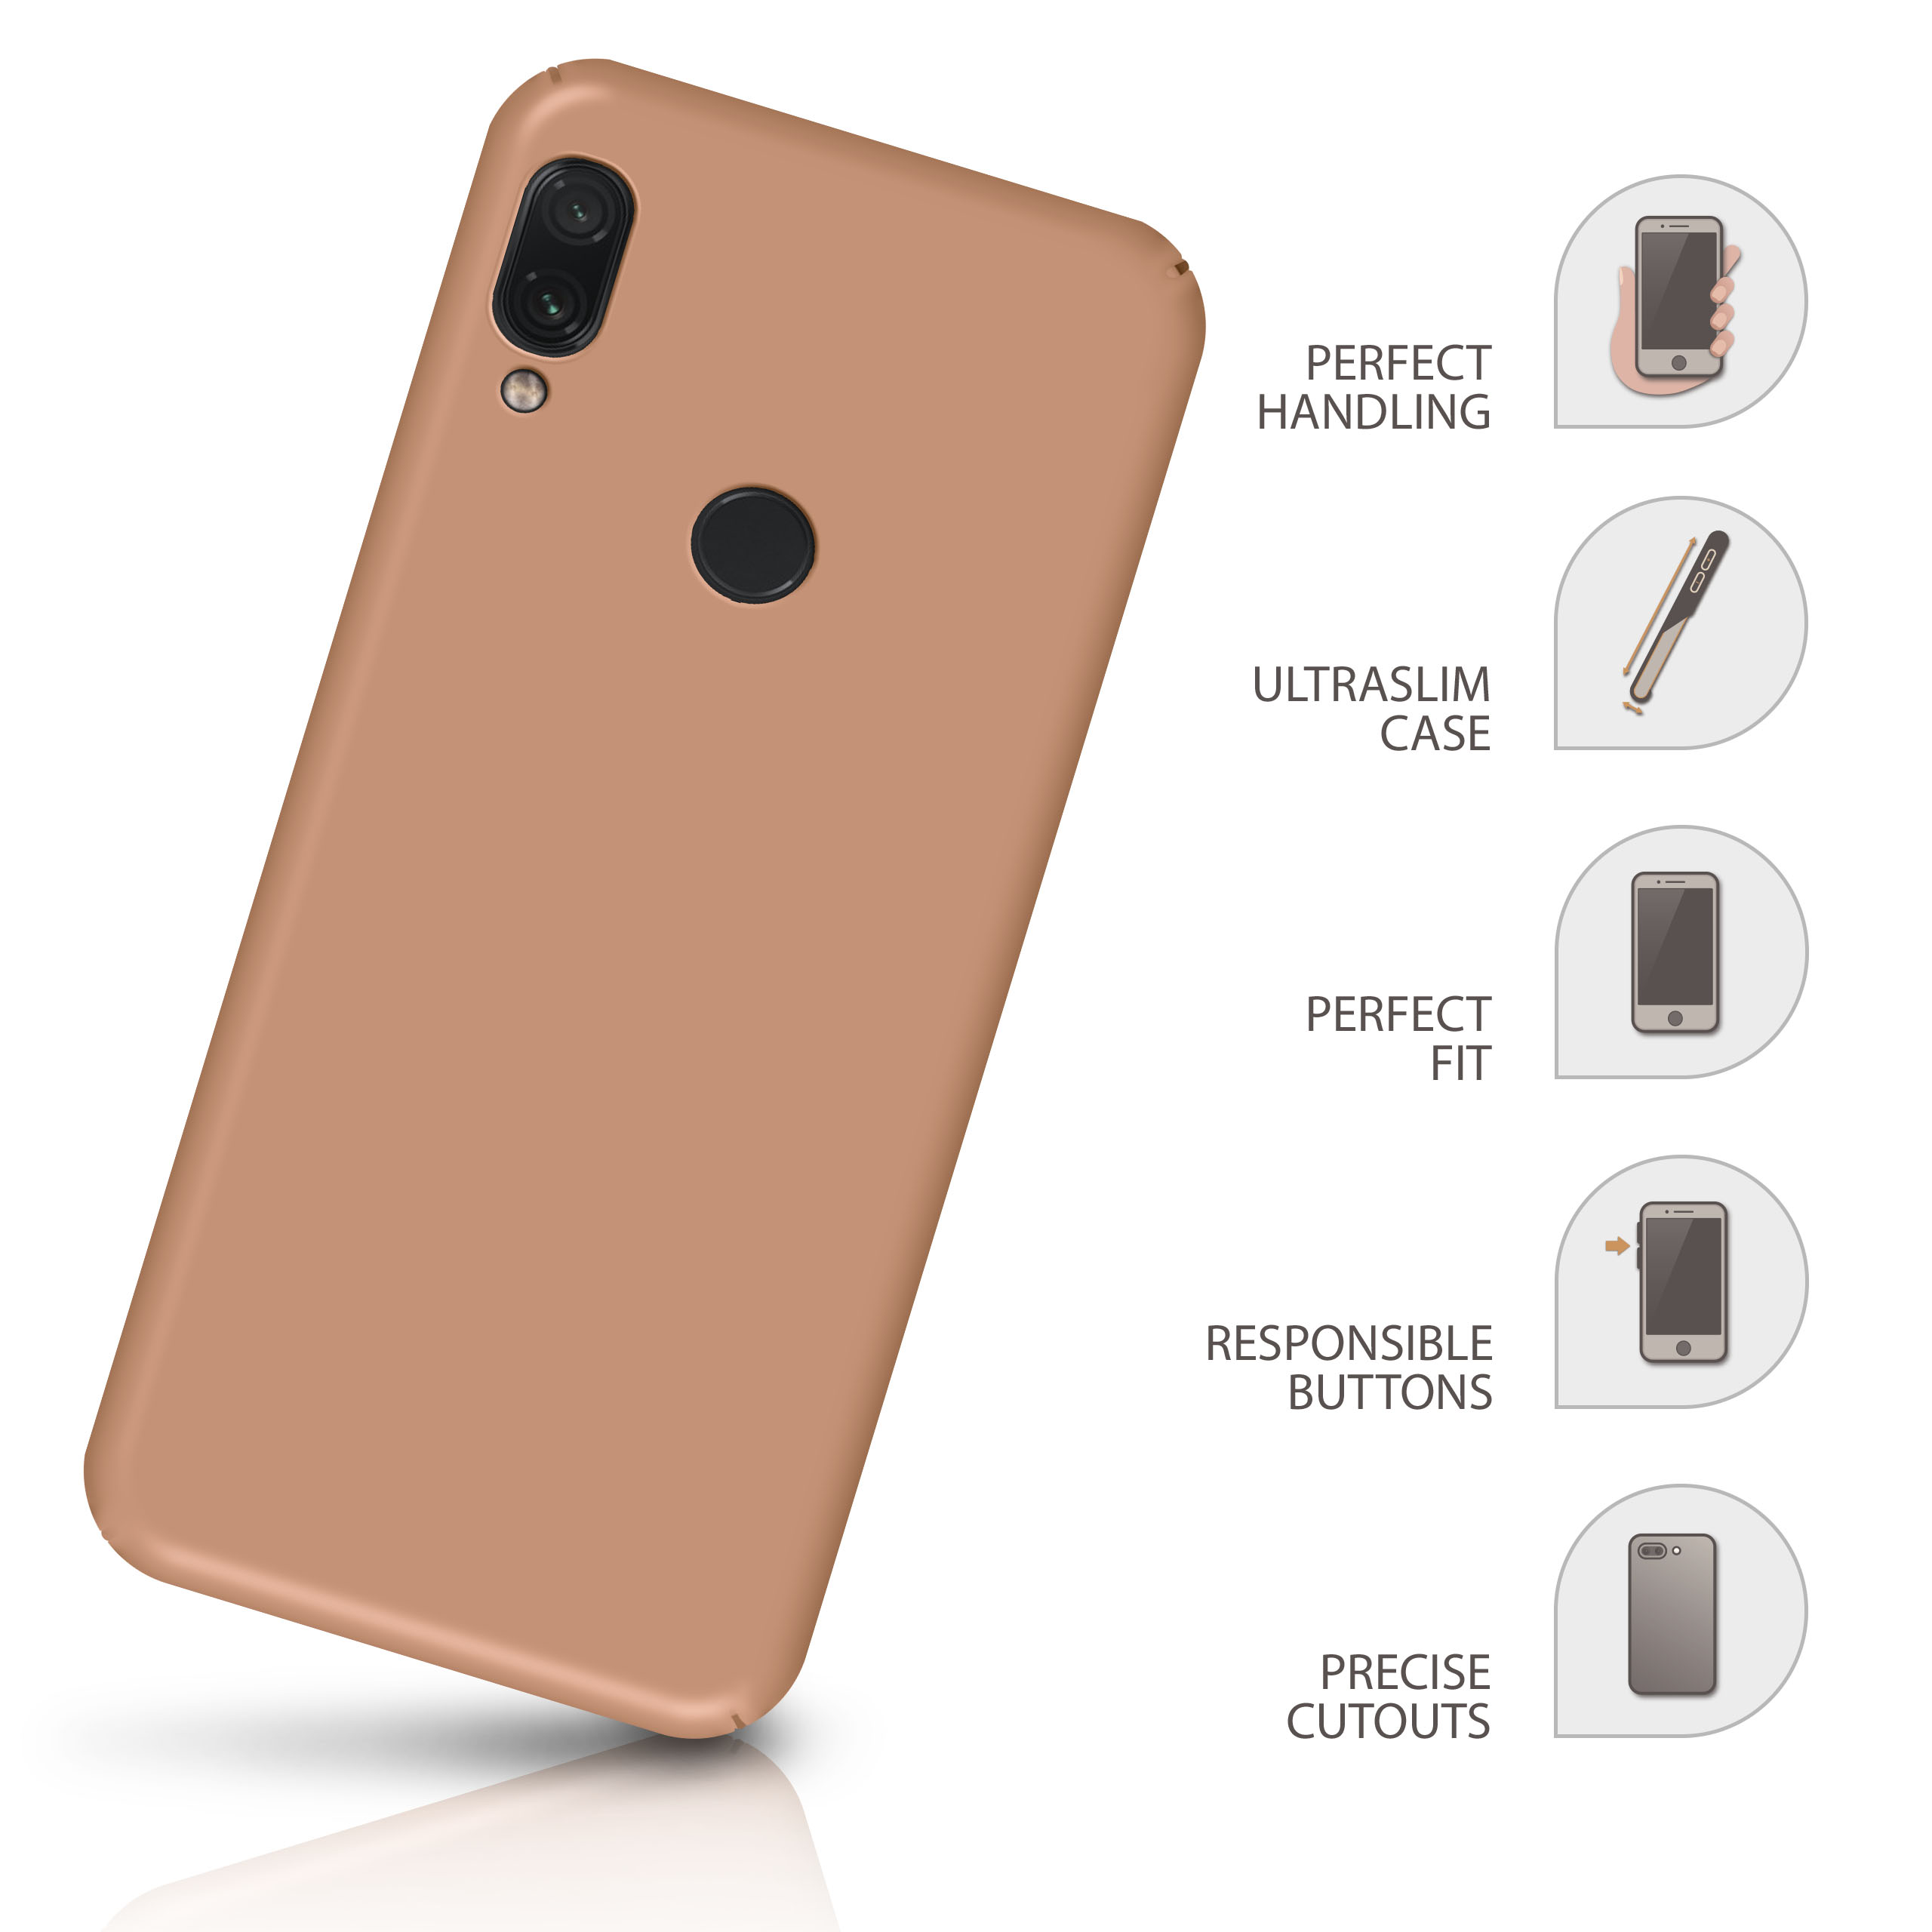 MOEX Alpha Case, Backcover, 7/ / Note Gold Redmi 7S, Note Pro Xiaomi, 7